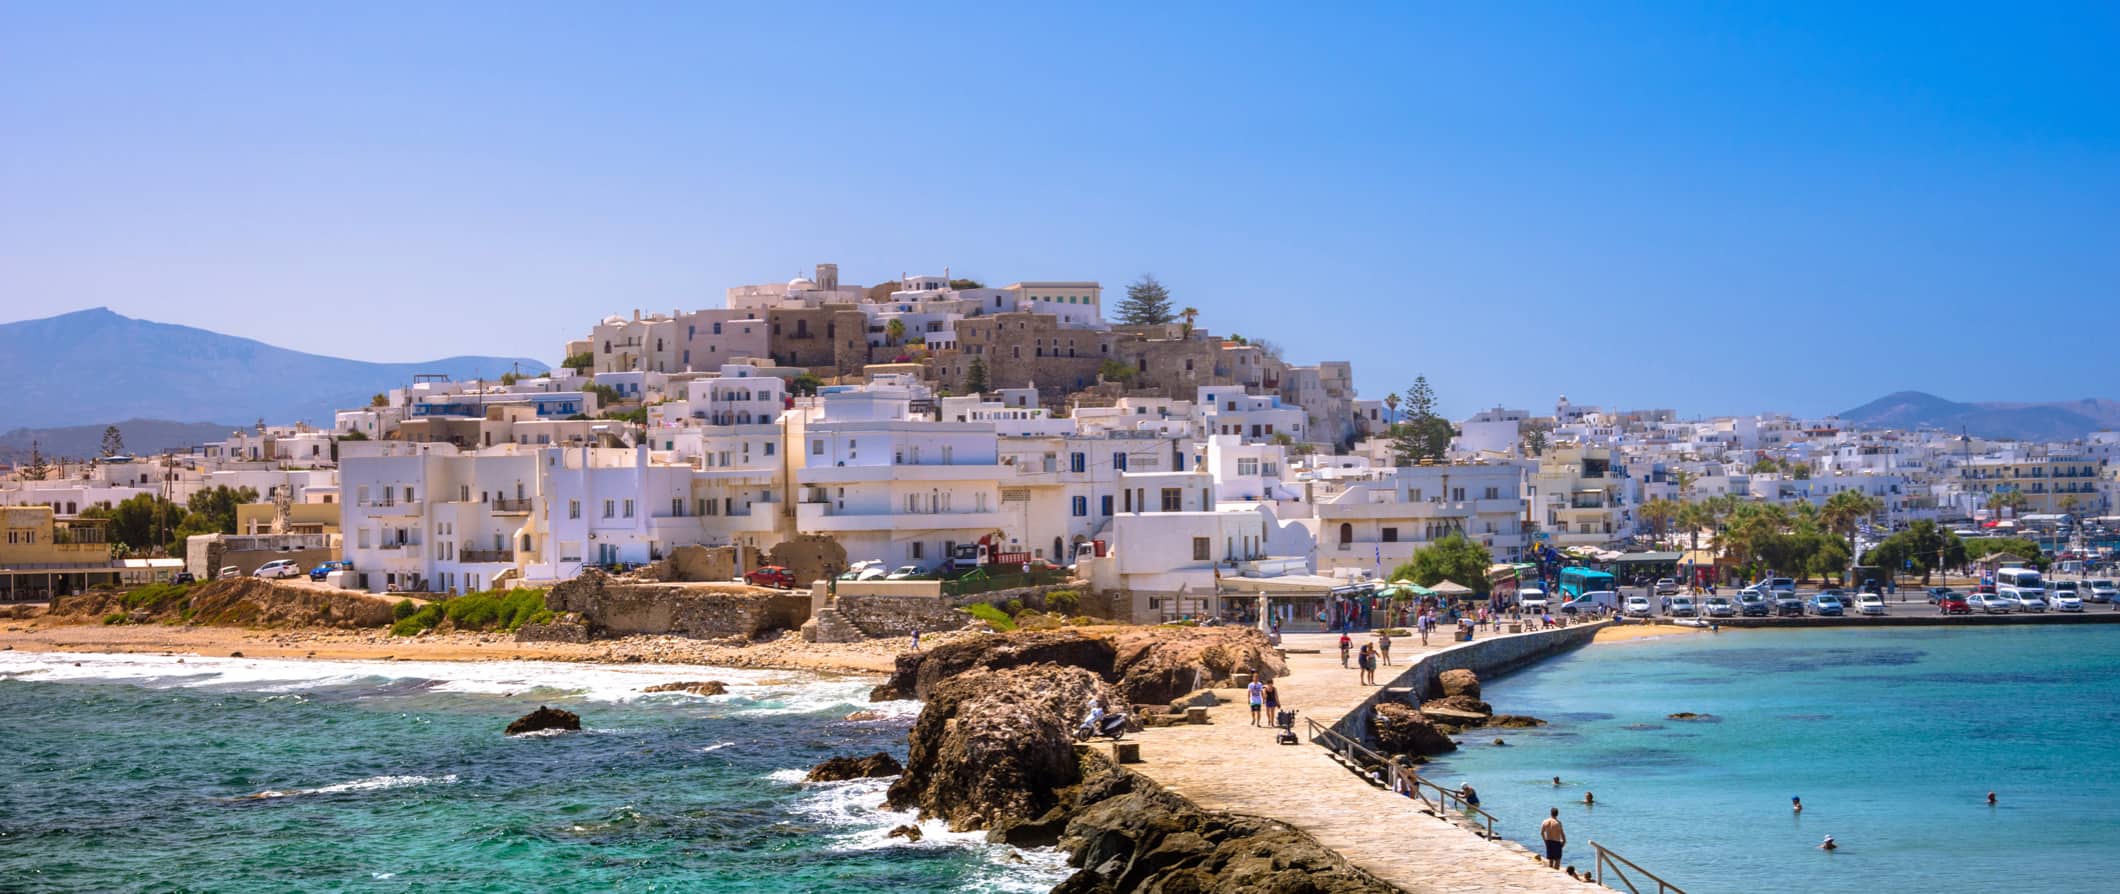 The stunning view of Naxos in Greece as tourists explore the coast